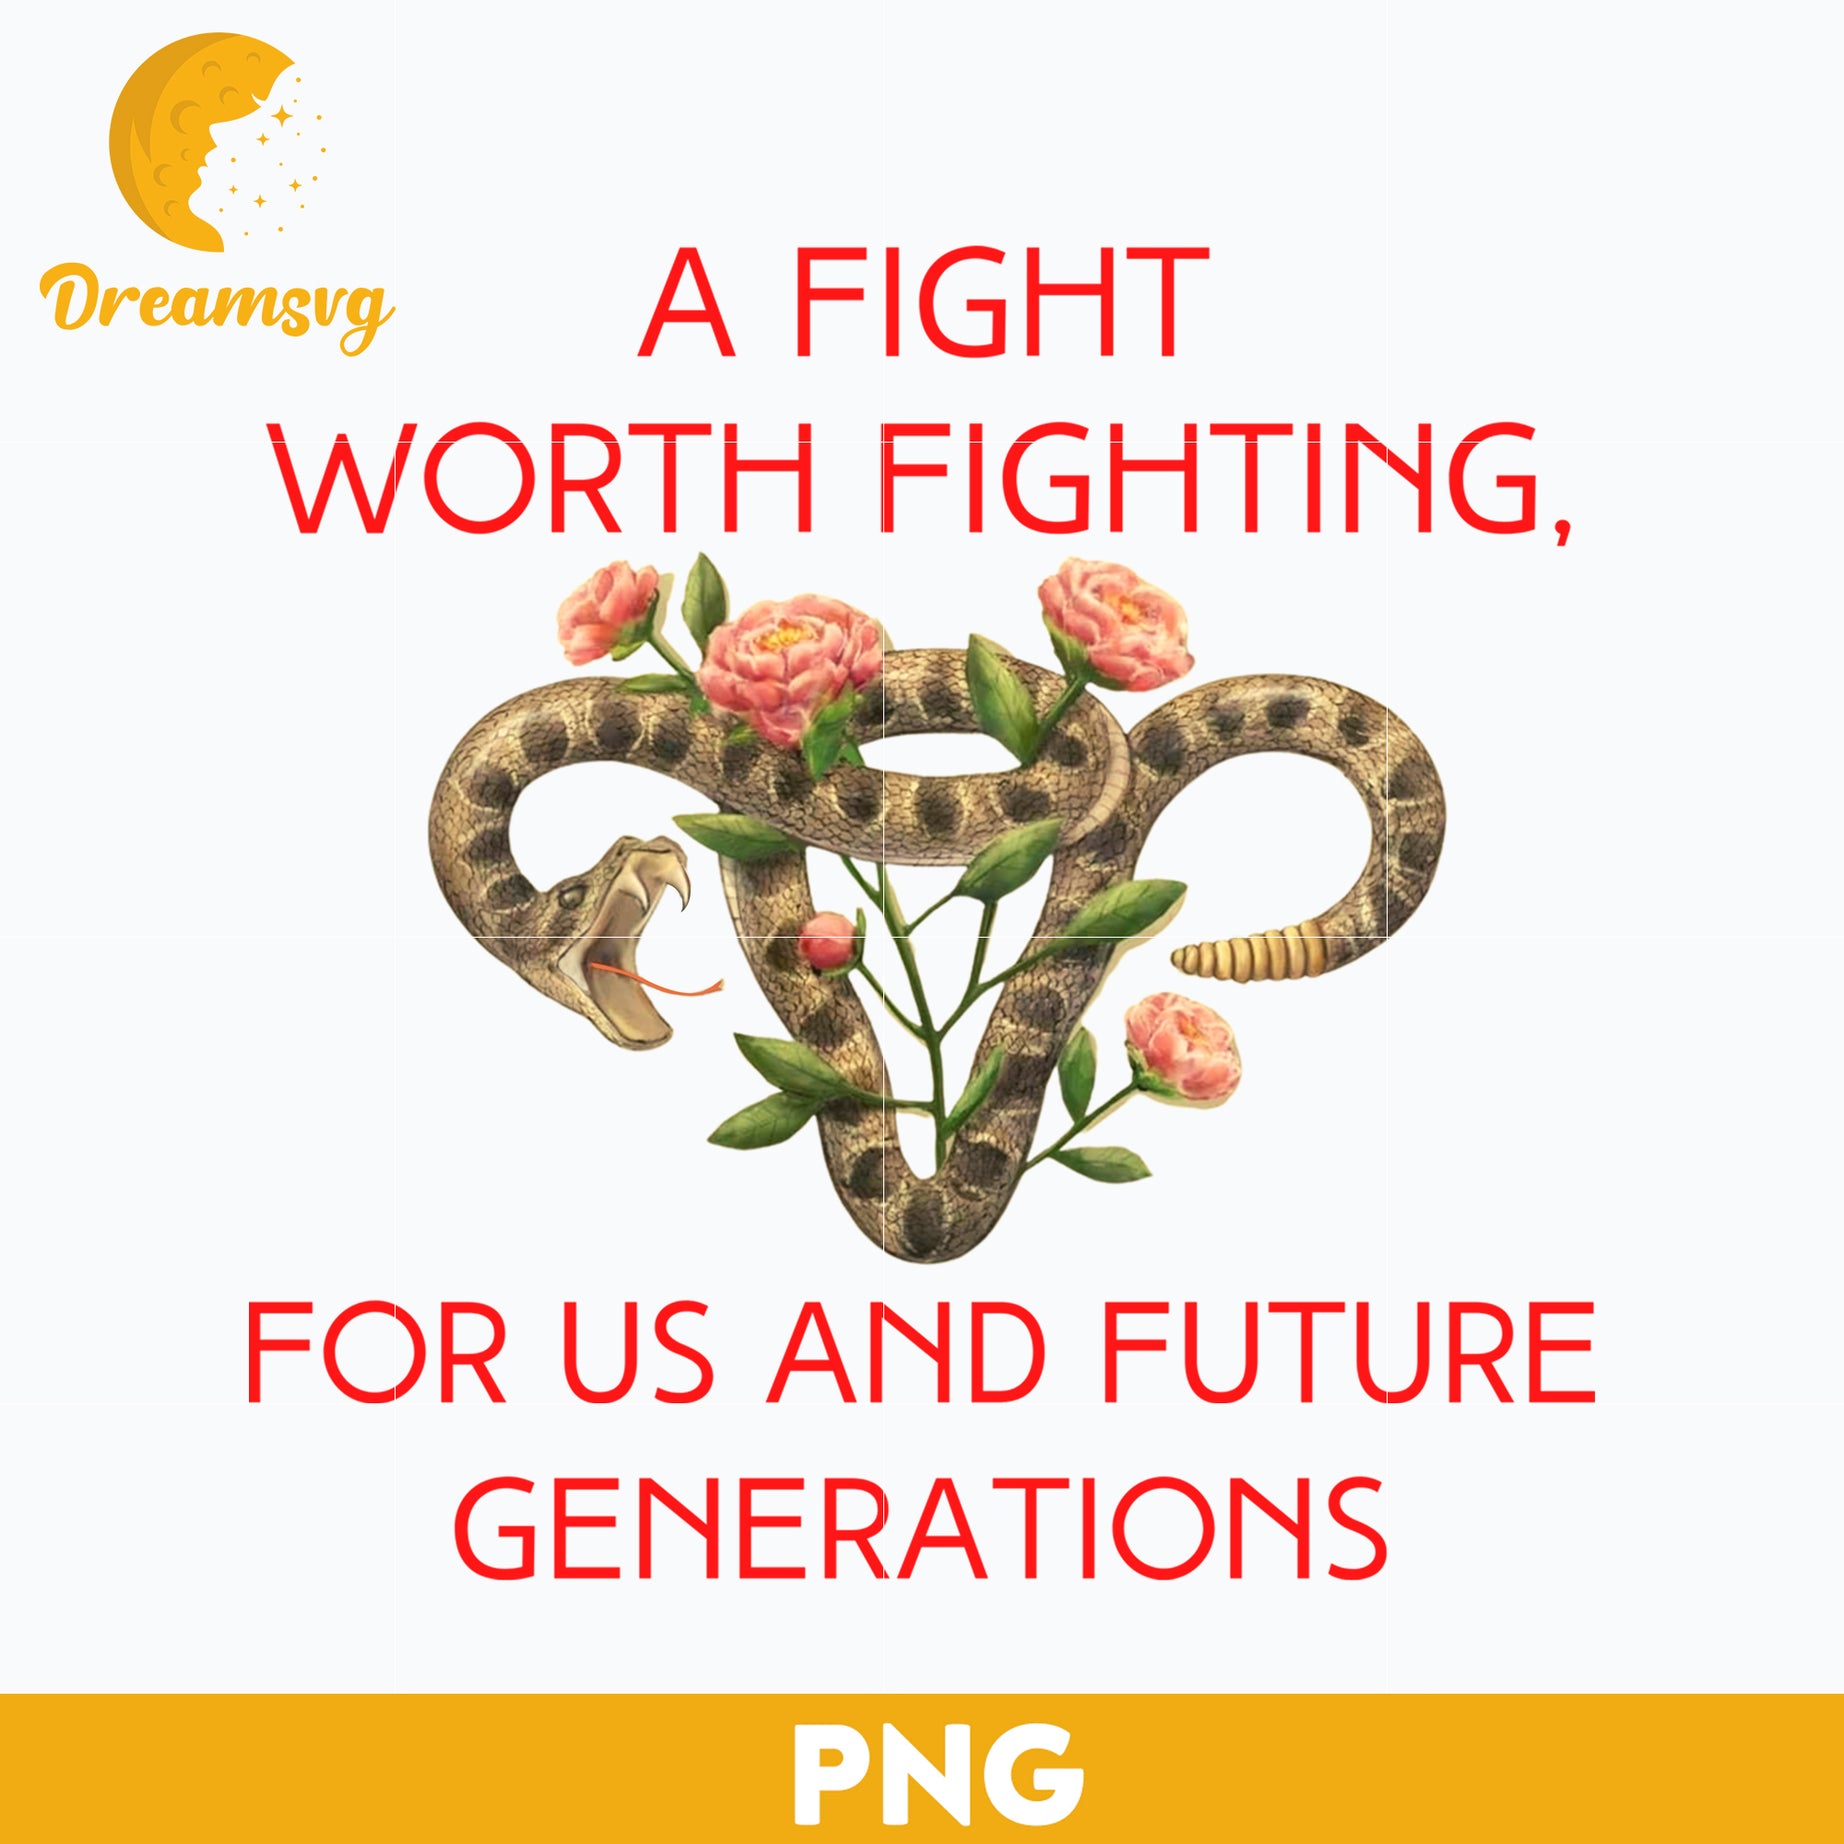 A Figh Worth Fighting, For Us And future Generations PNG, Trending PNG, PNG file, Digital file.